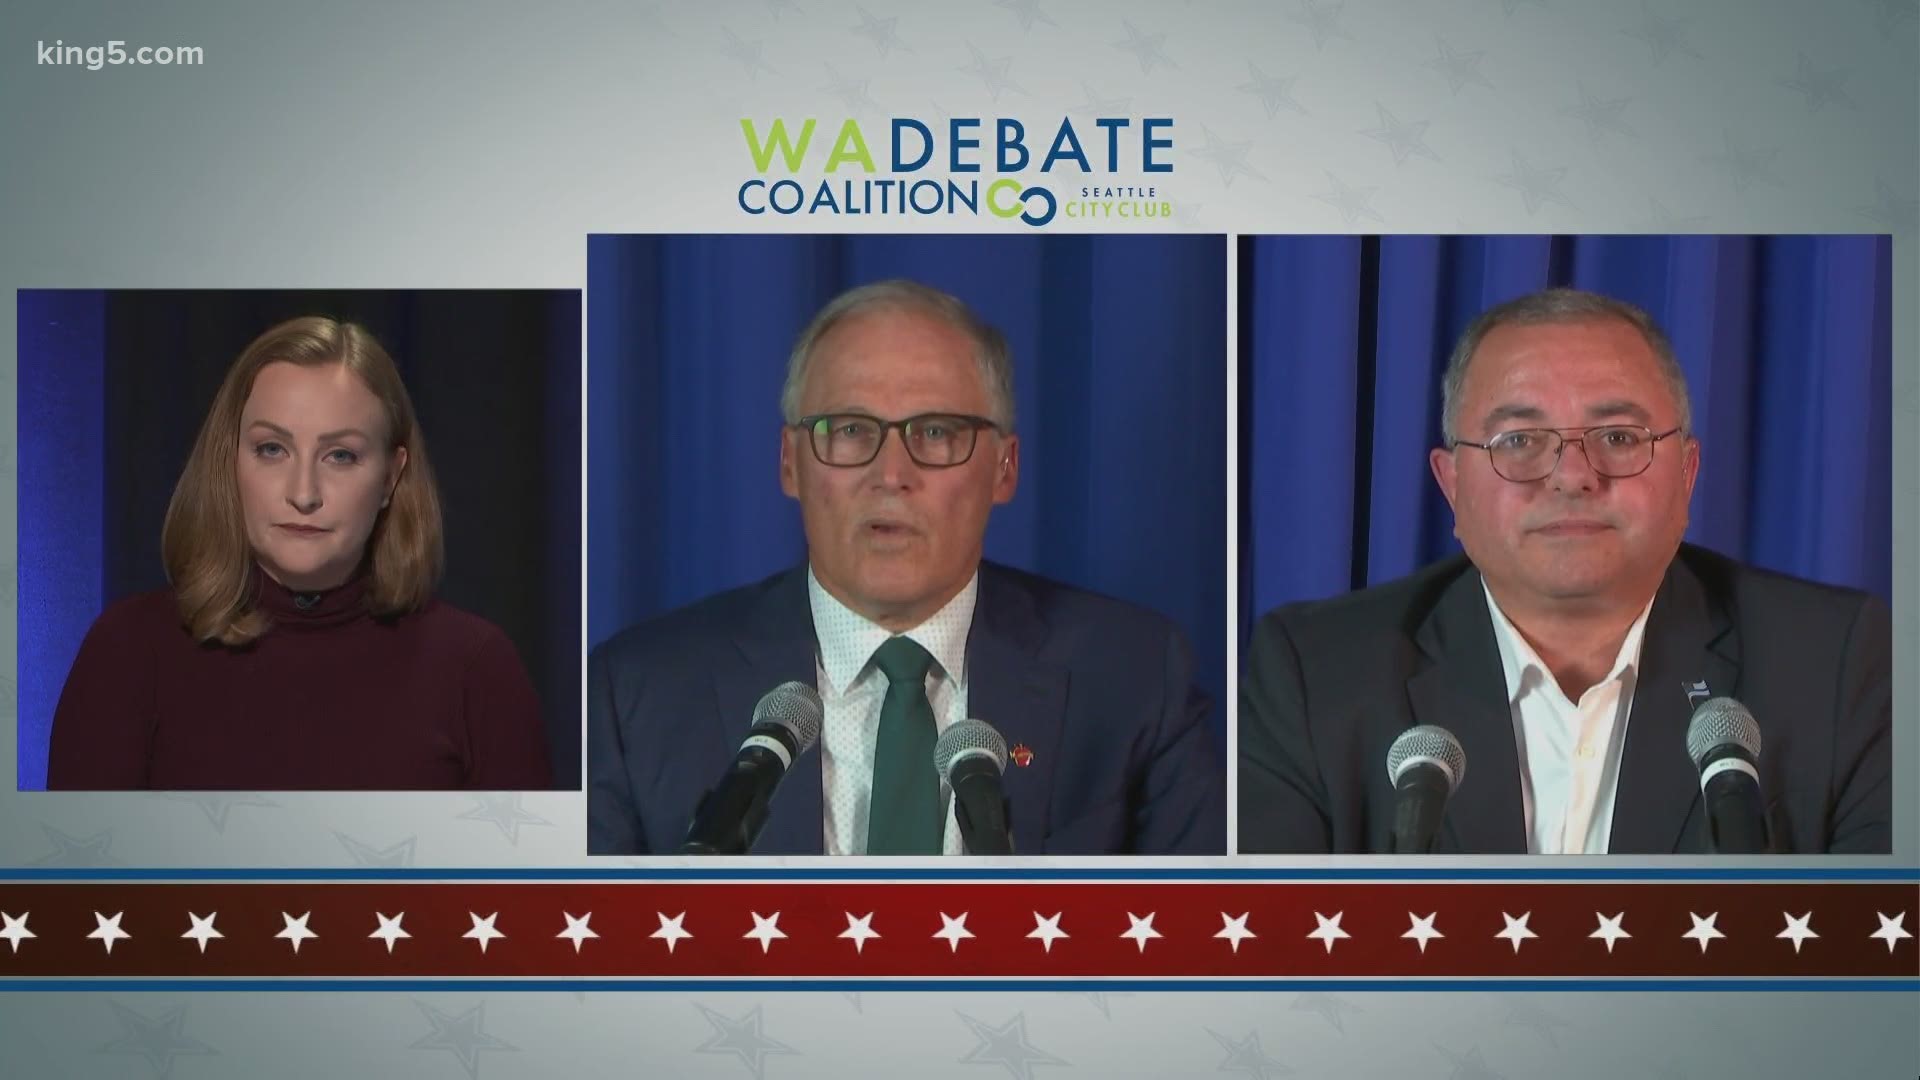 Republican Loren Culp and incumbent Gov. Jay Inslee deliver closing statements from the only televised debate in Washington.